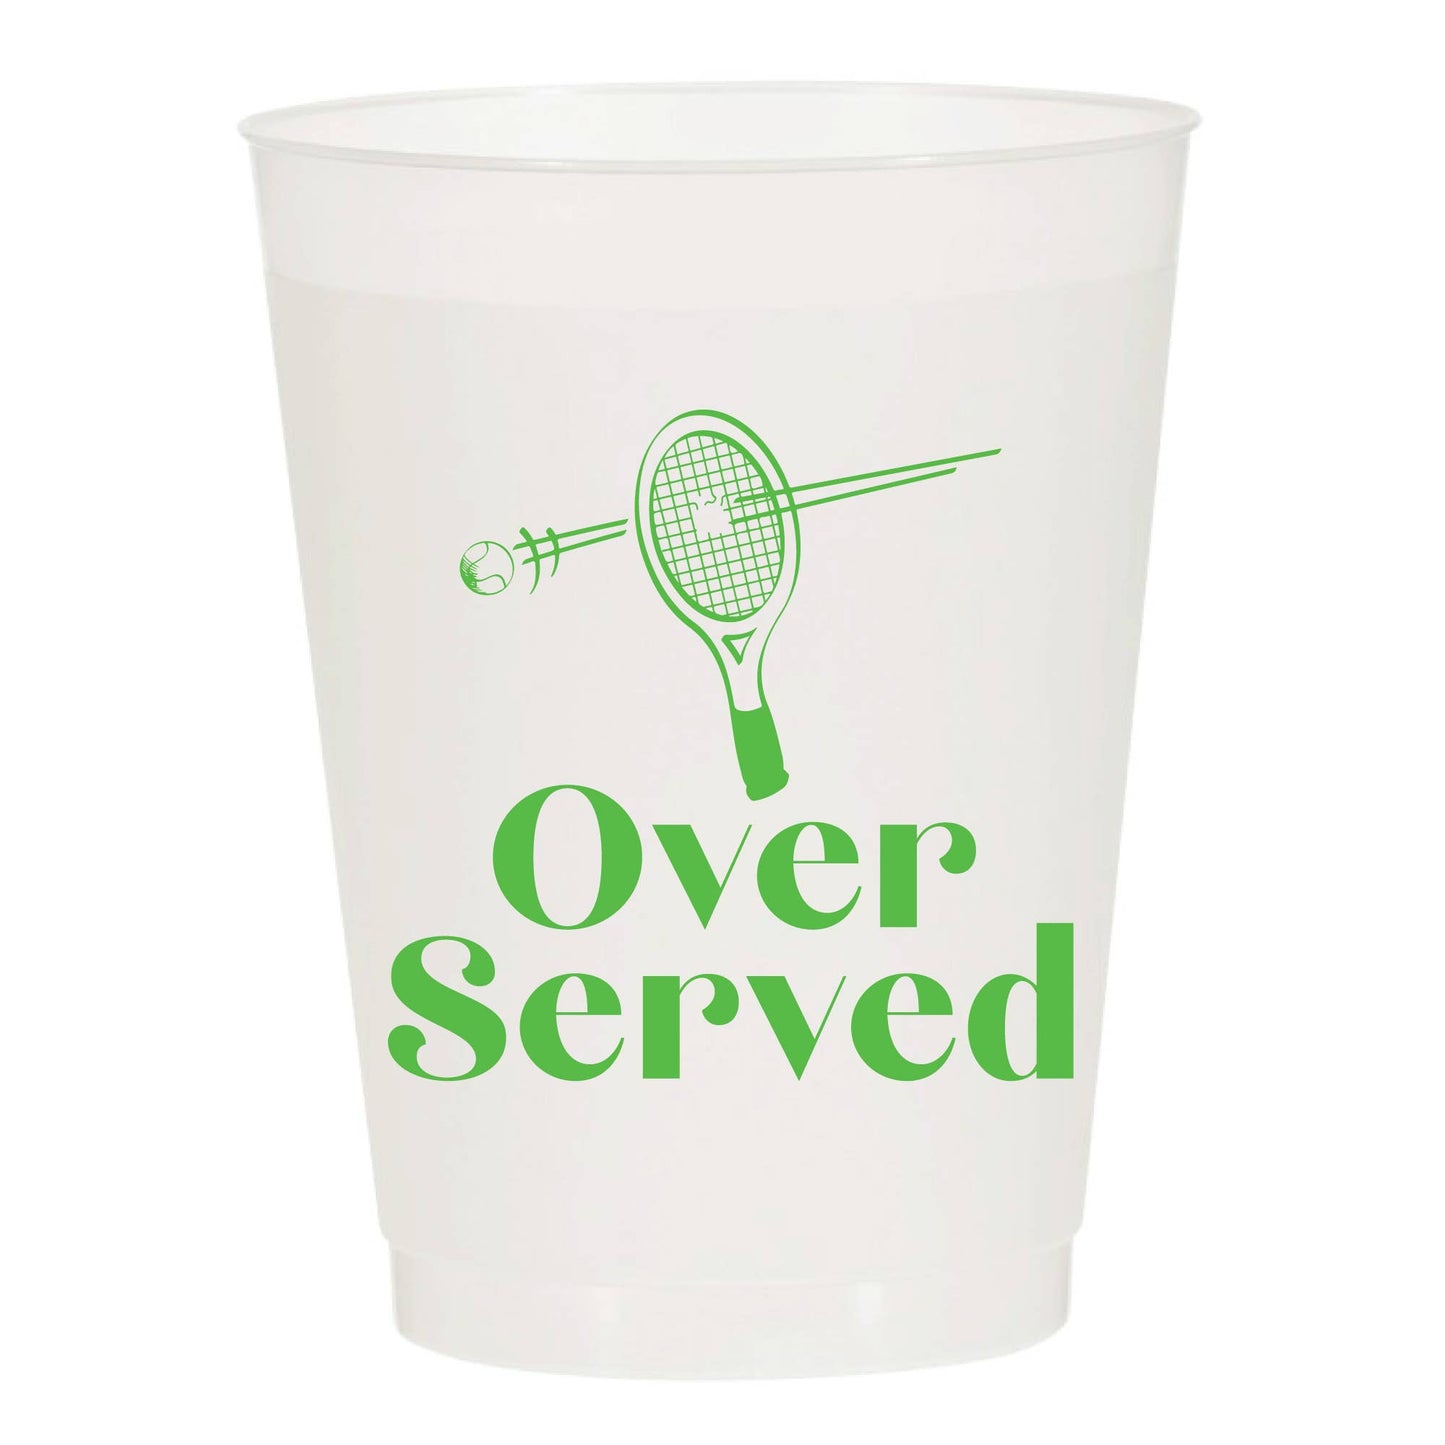 Over Served Tennis Racket To Go Cup Set of 10 Reusable Cups